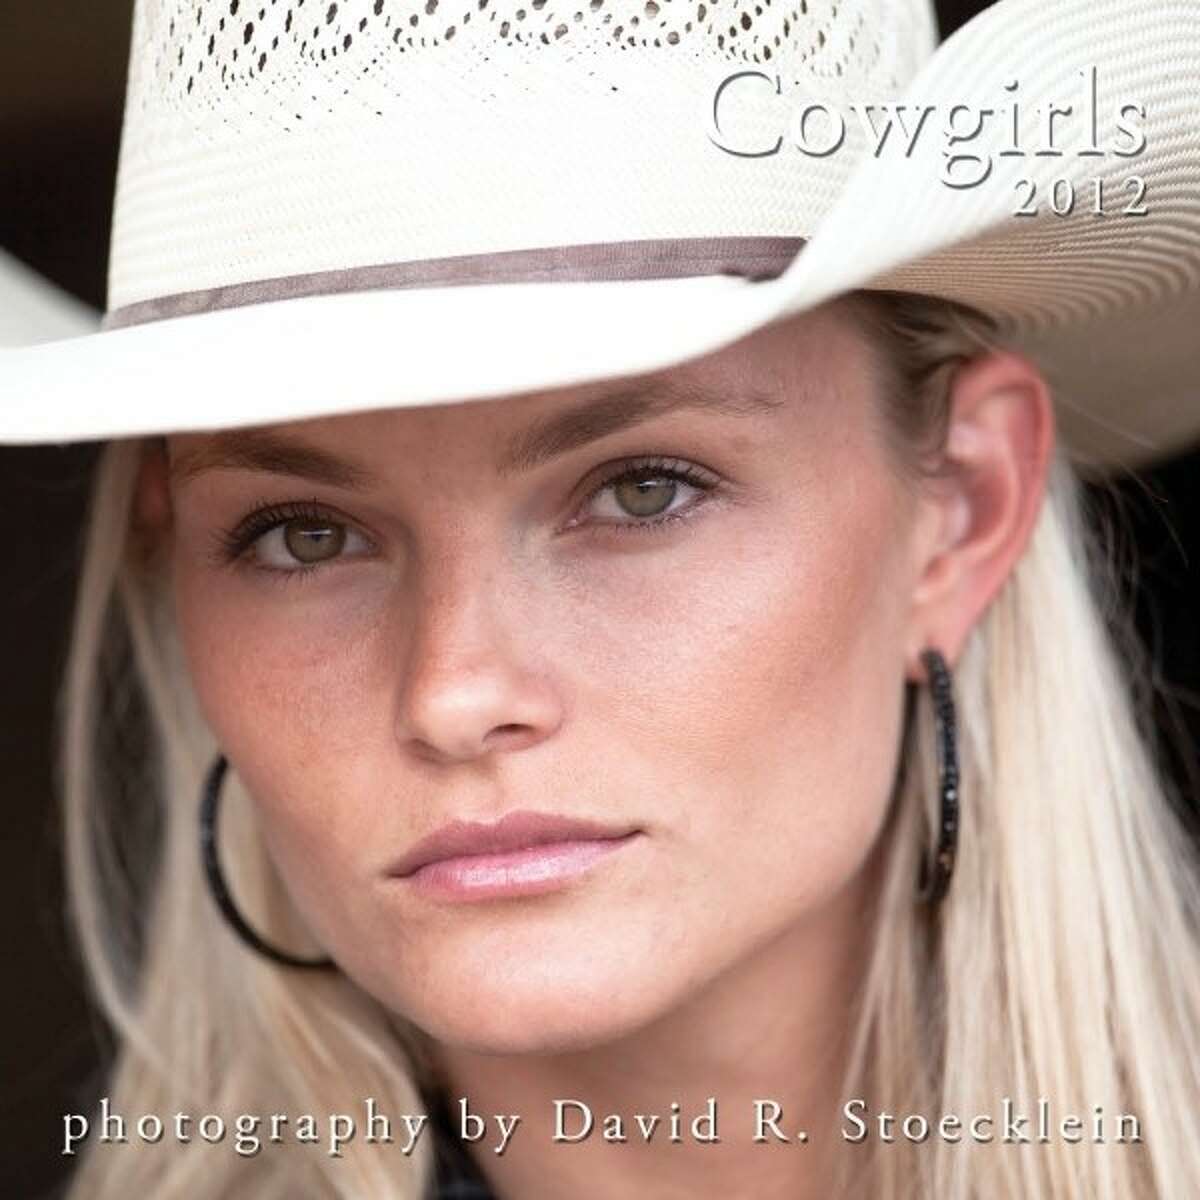 Cleveland Resident Bucks Traditional Modeling To Be Featured In Cowgirl Calendar